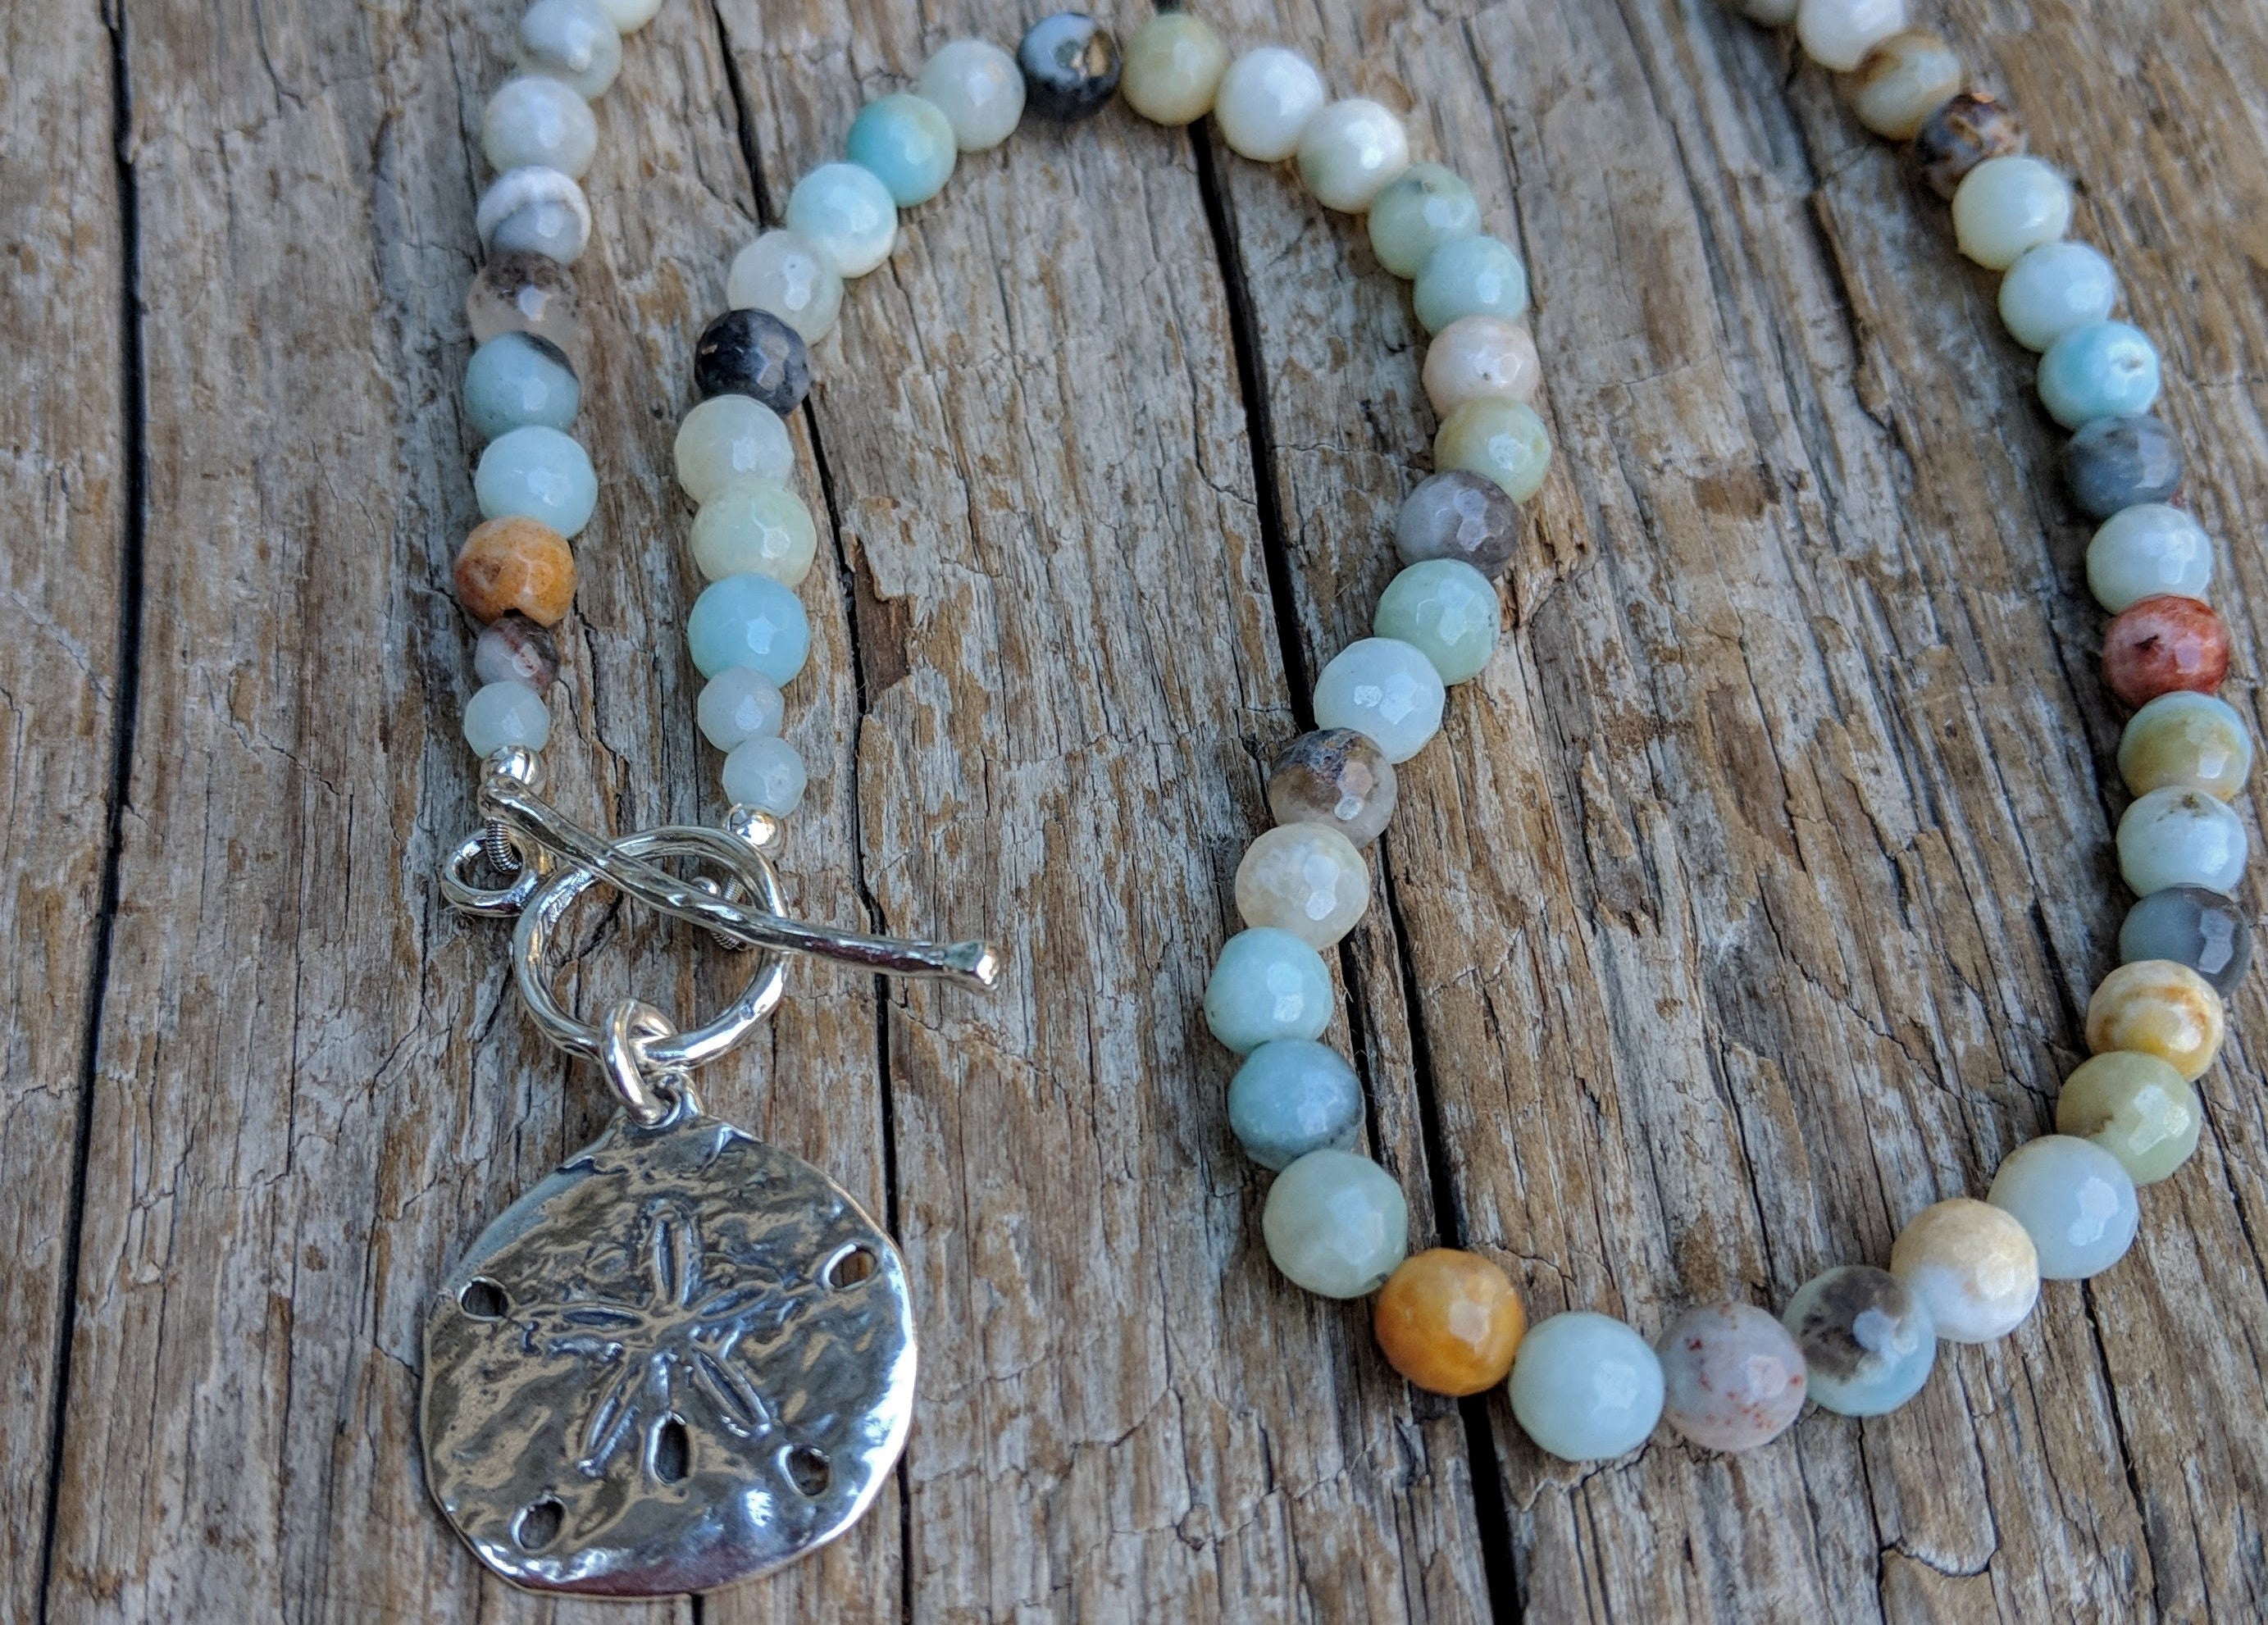 This handmade artisan one-of-a-kind amazonite necklace features the beautiful amazonite gemstone complimented by sterling silver. The calming pastel blues and greens of amazonite together with the silver sand dollar radiate peaceful energy and tranquility. Feel like you are taking a walk on a white sand beach with this beautiful unique necklace. 